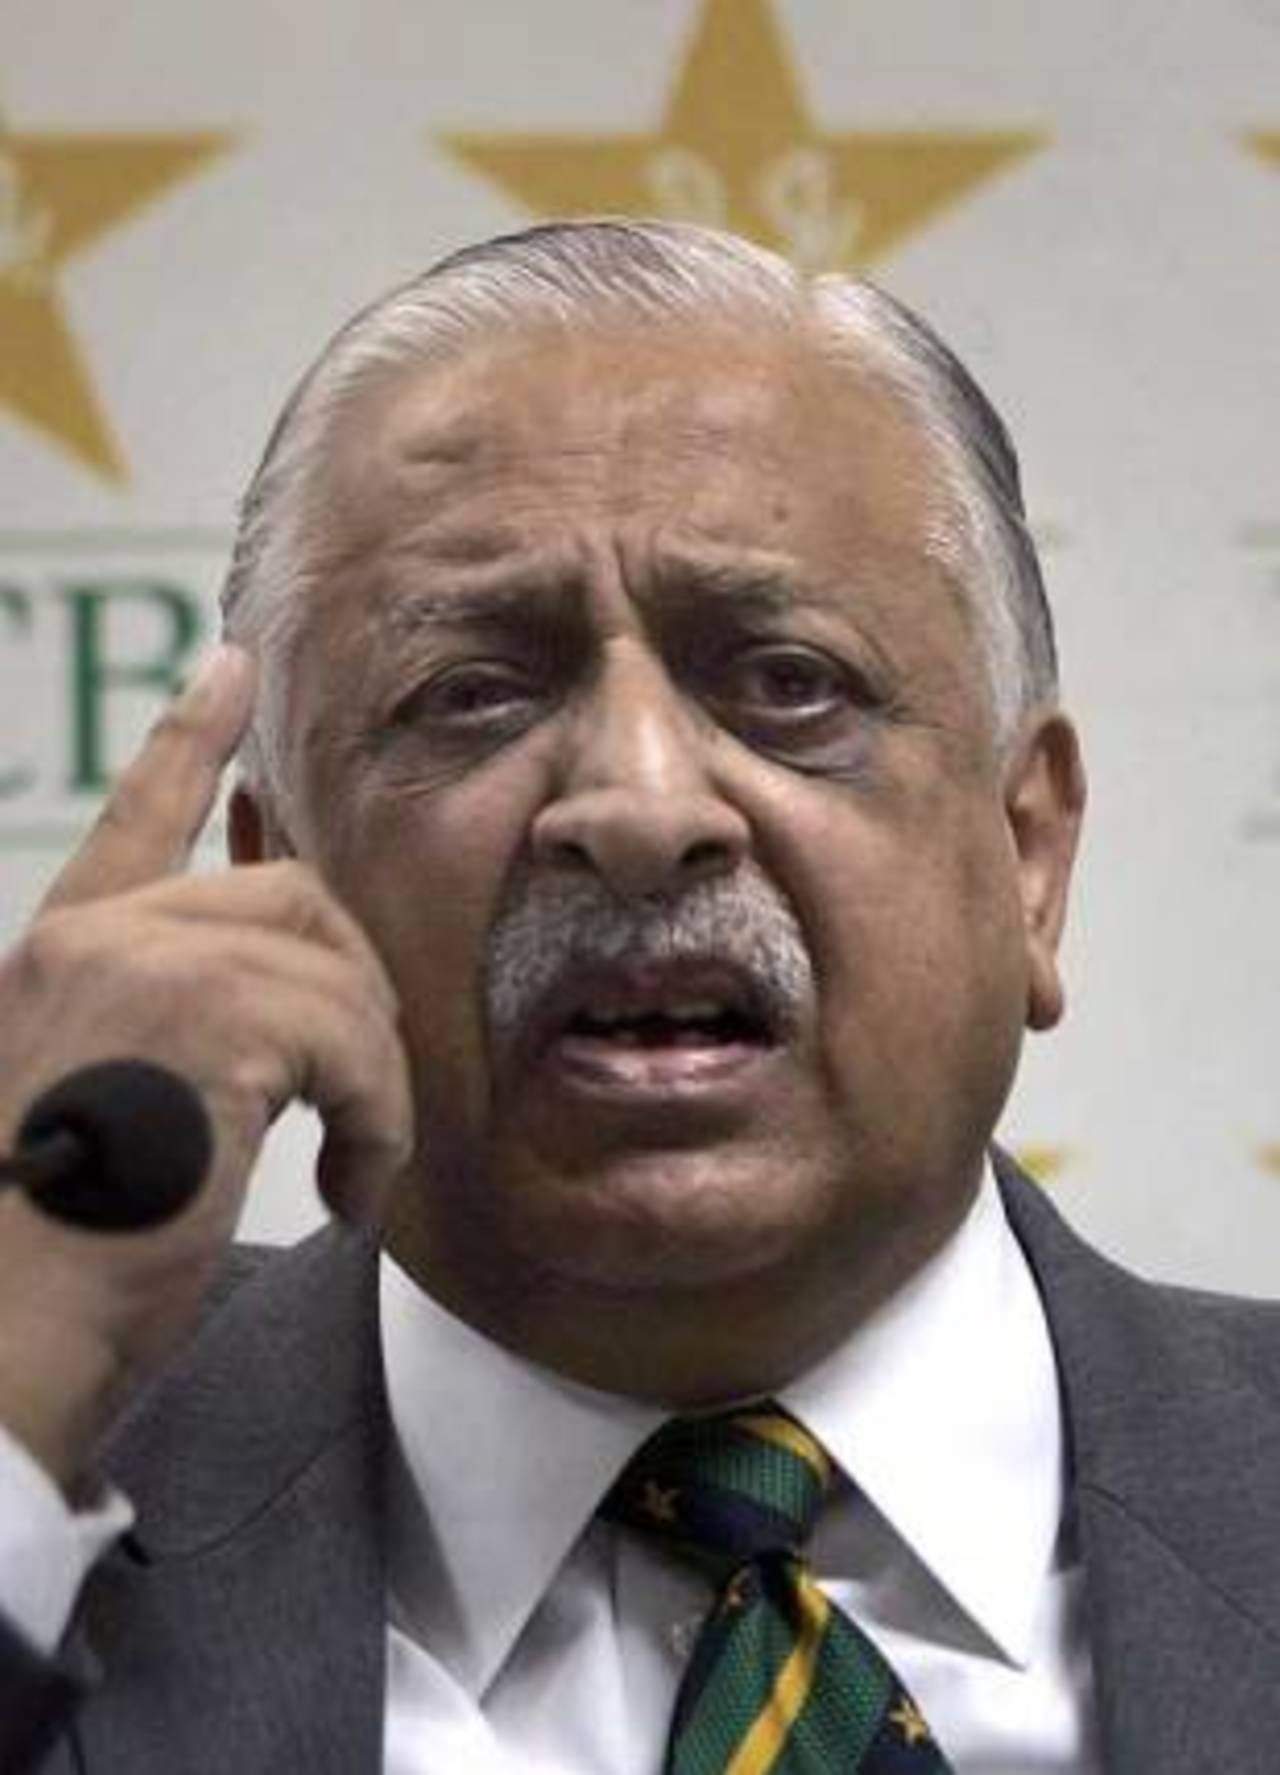 There has been tremendous pressure on the PCB chairman Ijaz Butt to be shown to be doing something&nbsp;&nbsp;&bull;&nbsp;&nbsp;Associated Press